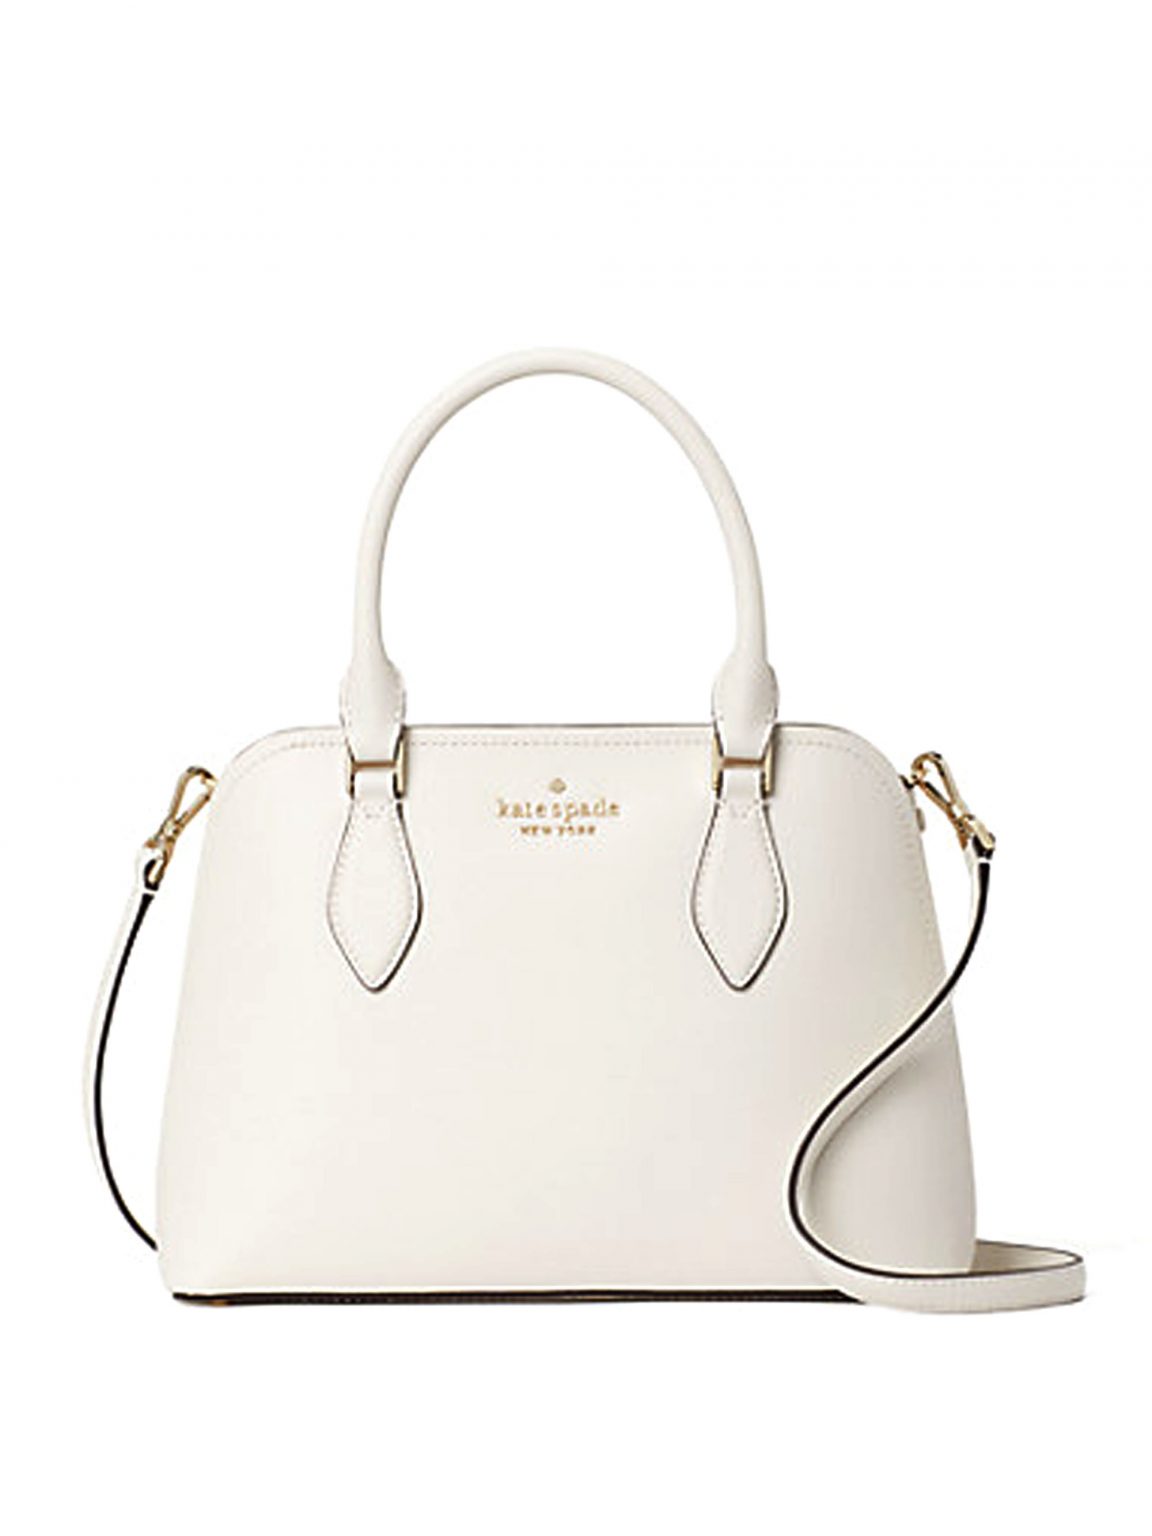 Kate Spade Darcy Small Satchel Parchment - Averand